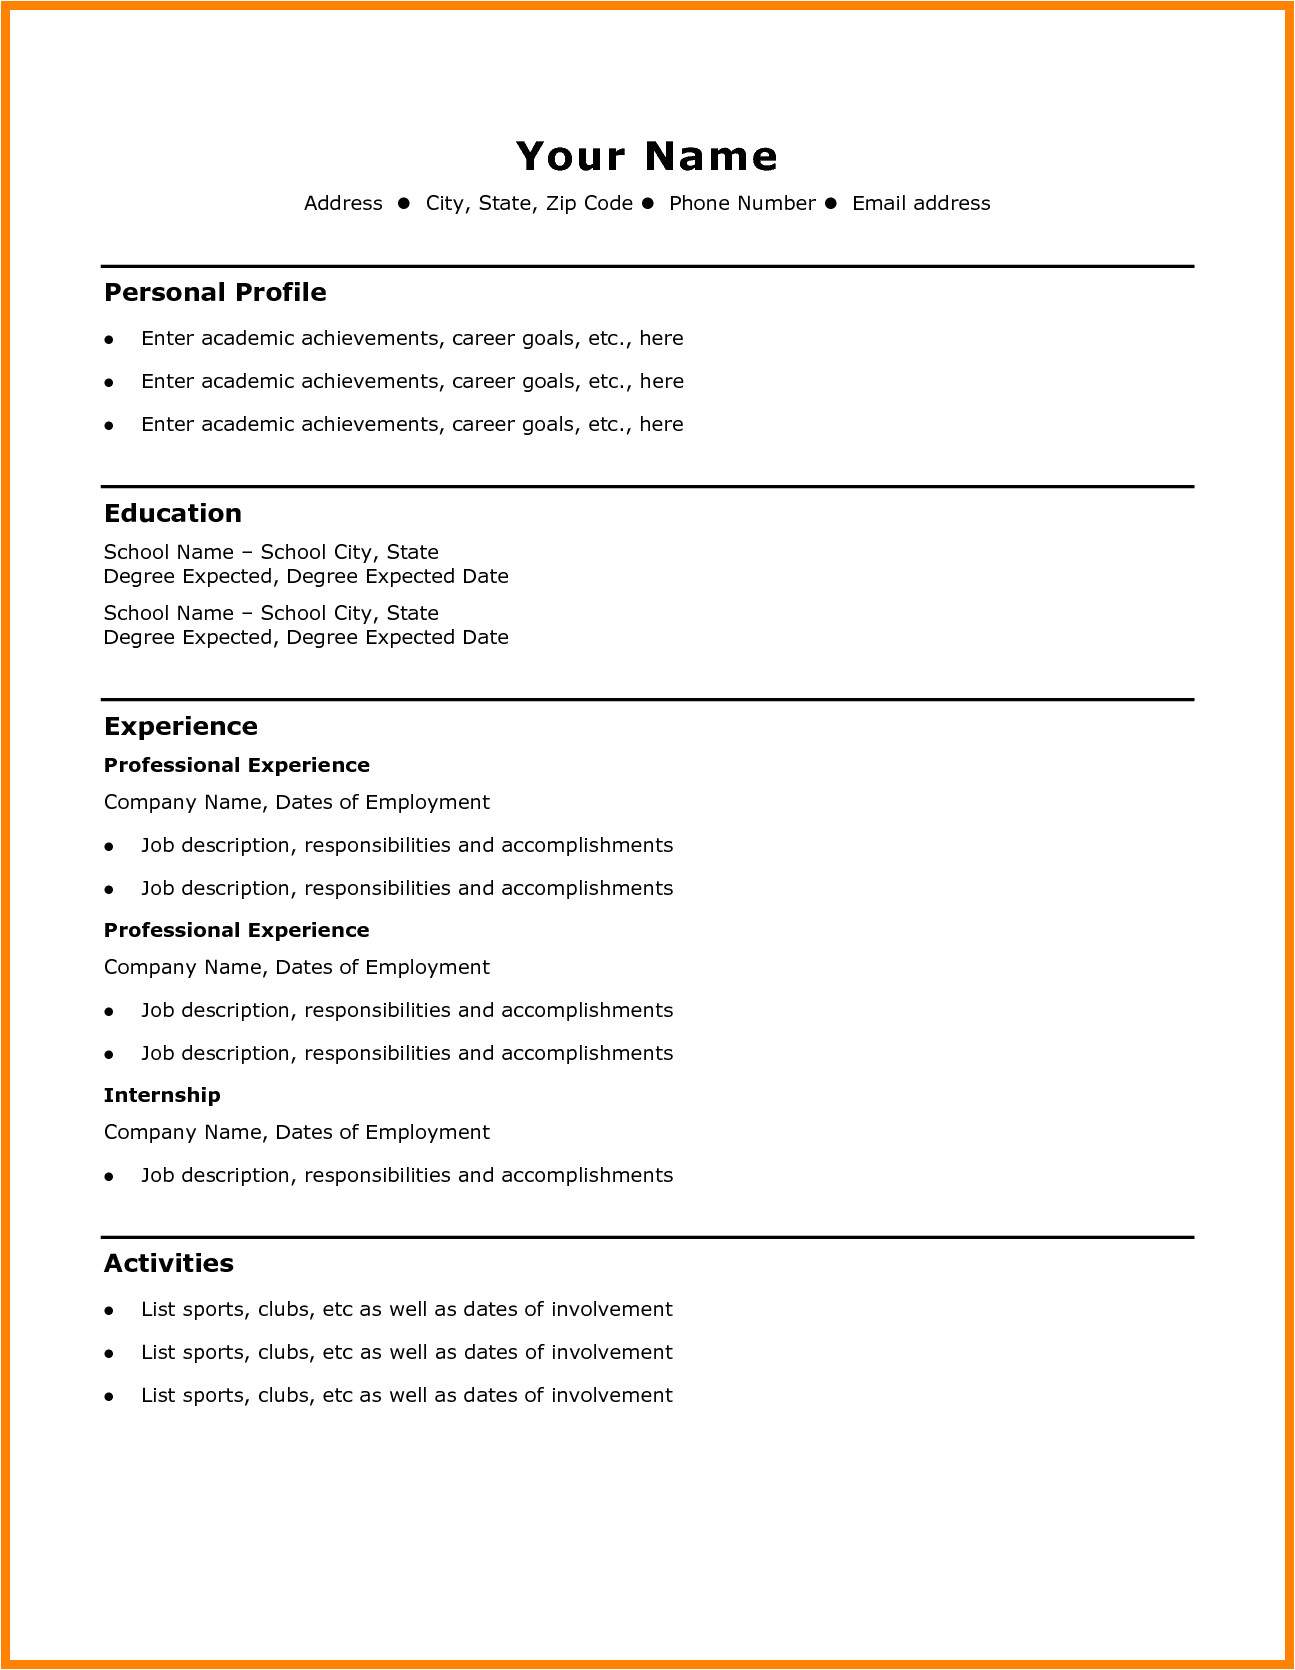 Basic Resume Profile Examples 9 Cv Sample Simple theorynpractice